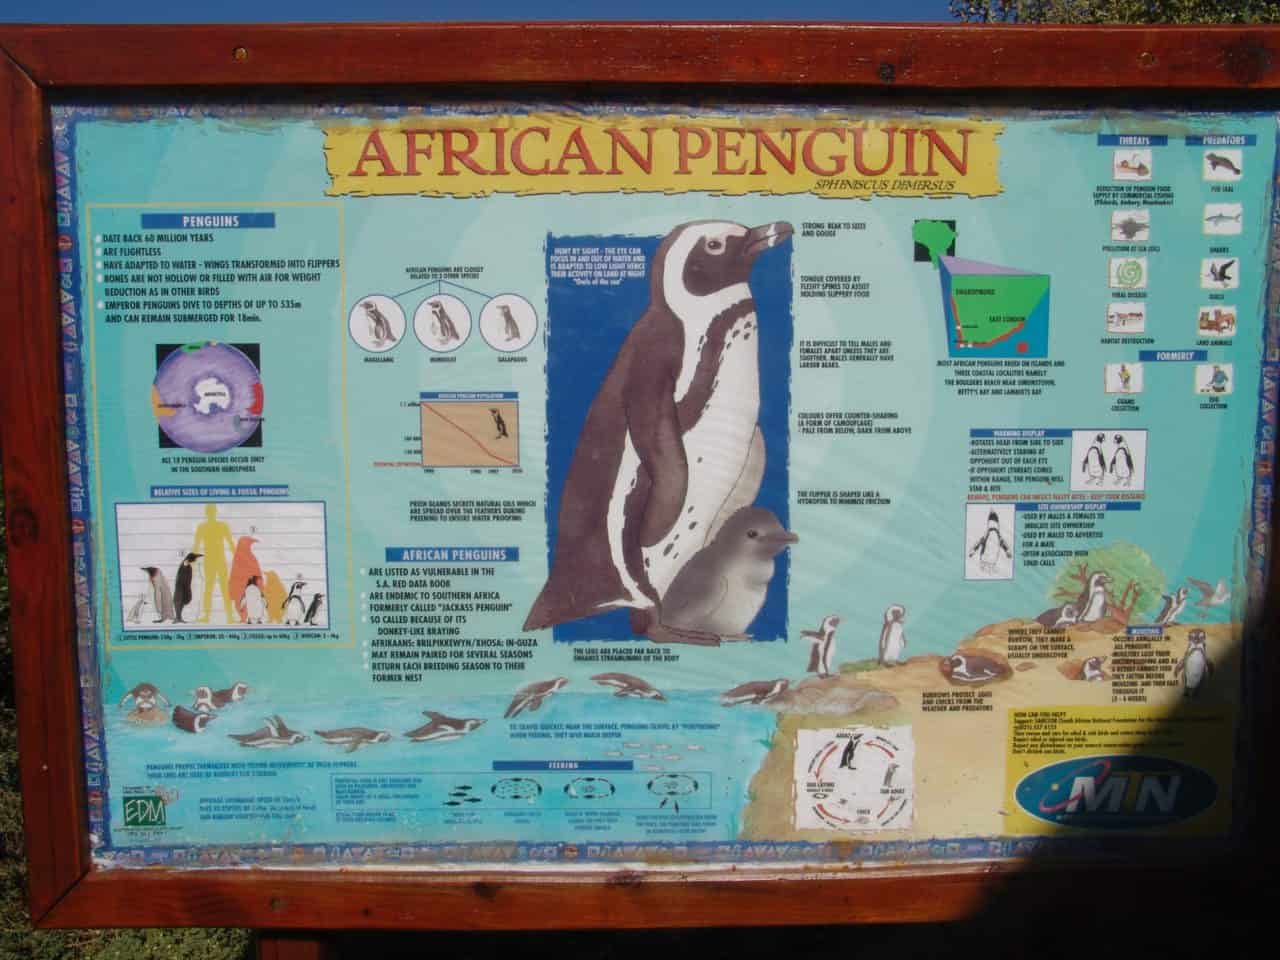 Explanatory board about the African penguin